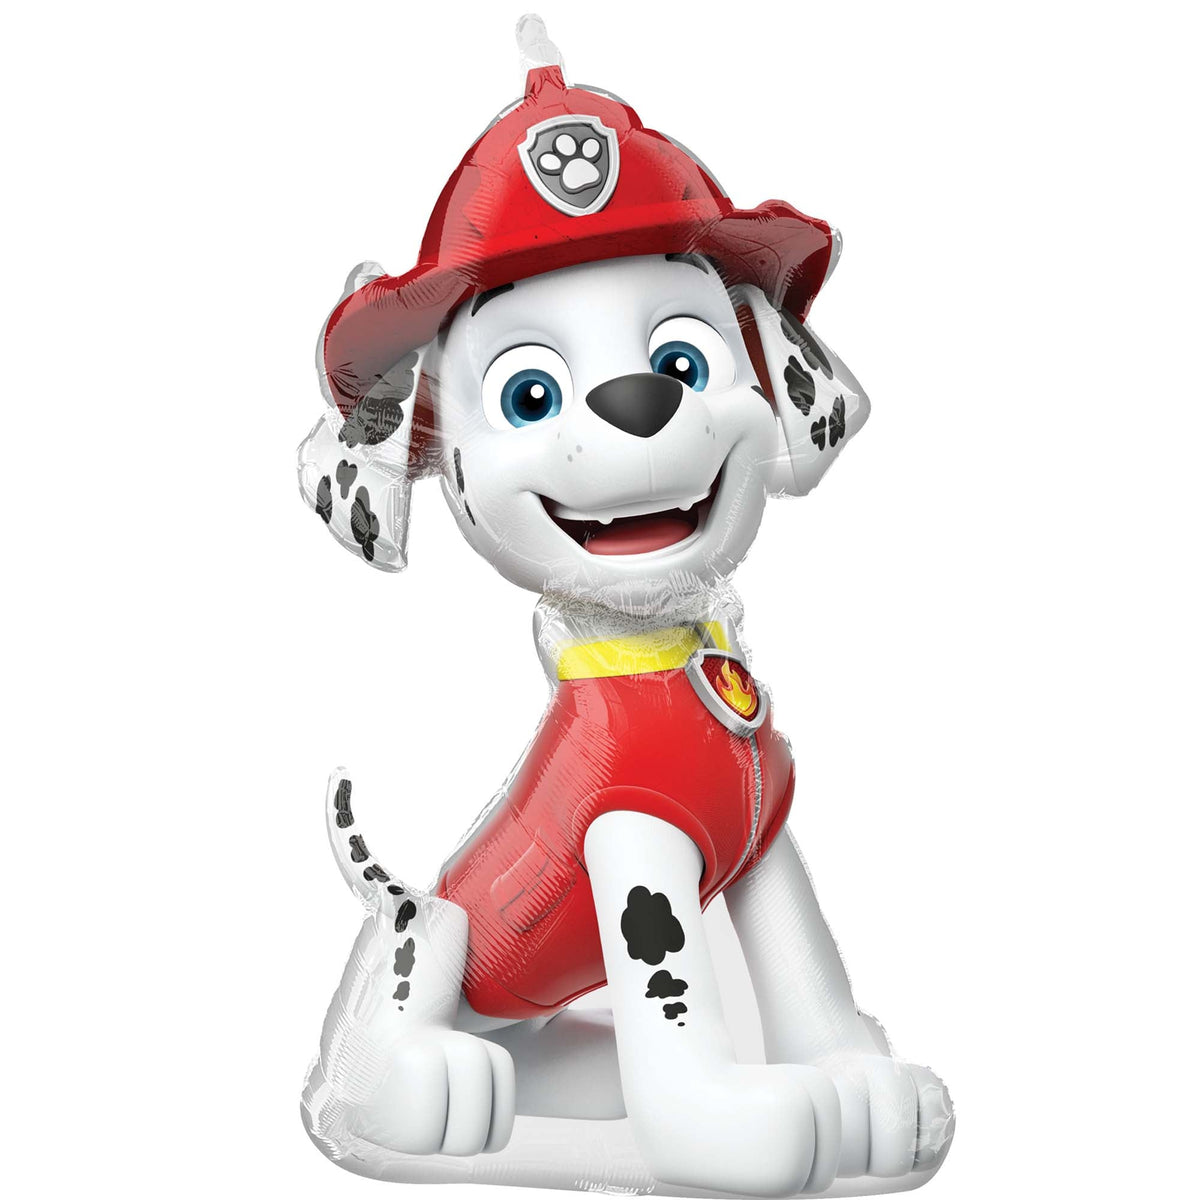 LE GROUPE BLC INTL INC Balloons Paw Patrol Marshall Supershape Foil Balloon, 33 Inches, 1 Count